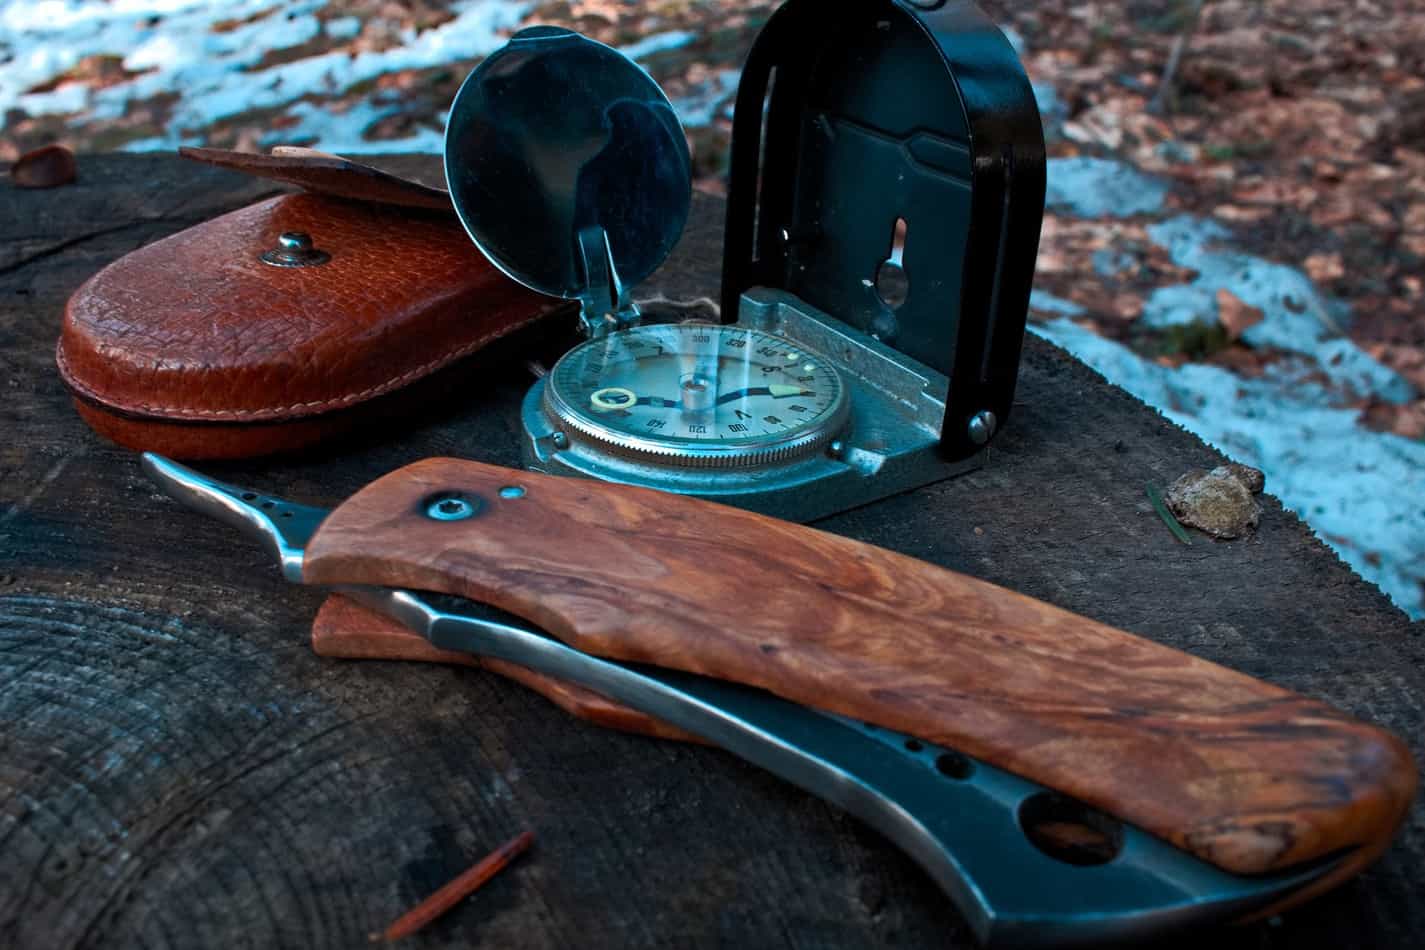 13 Essential Tools for Forest Survival Every Prepper Should Own